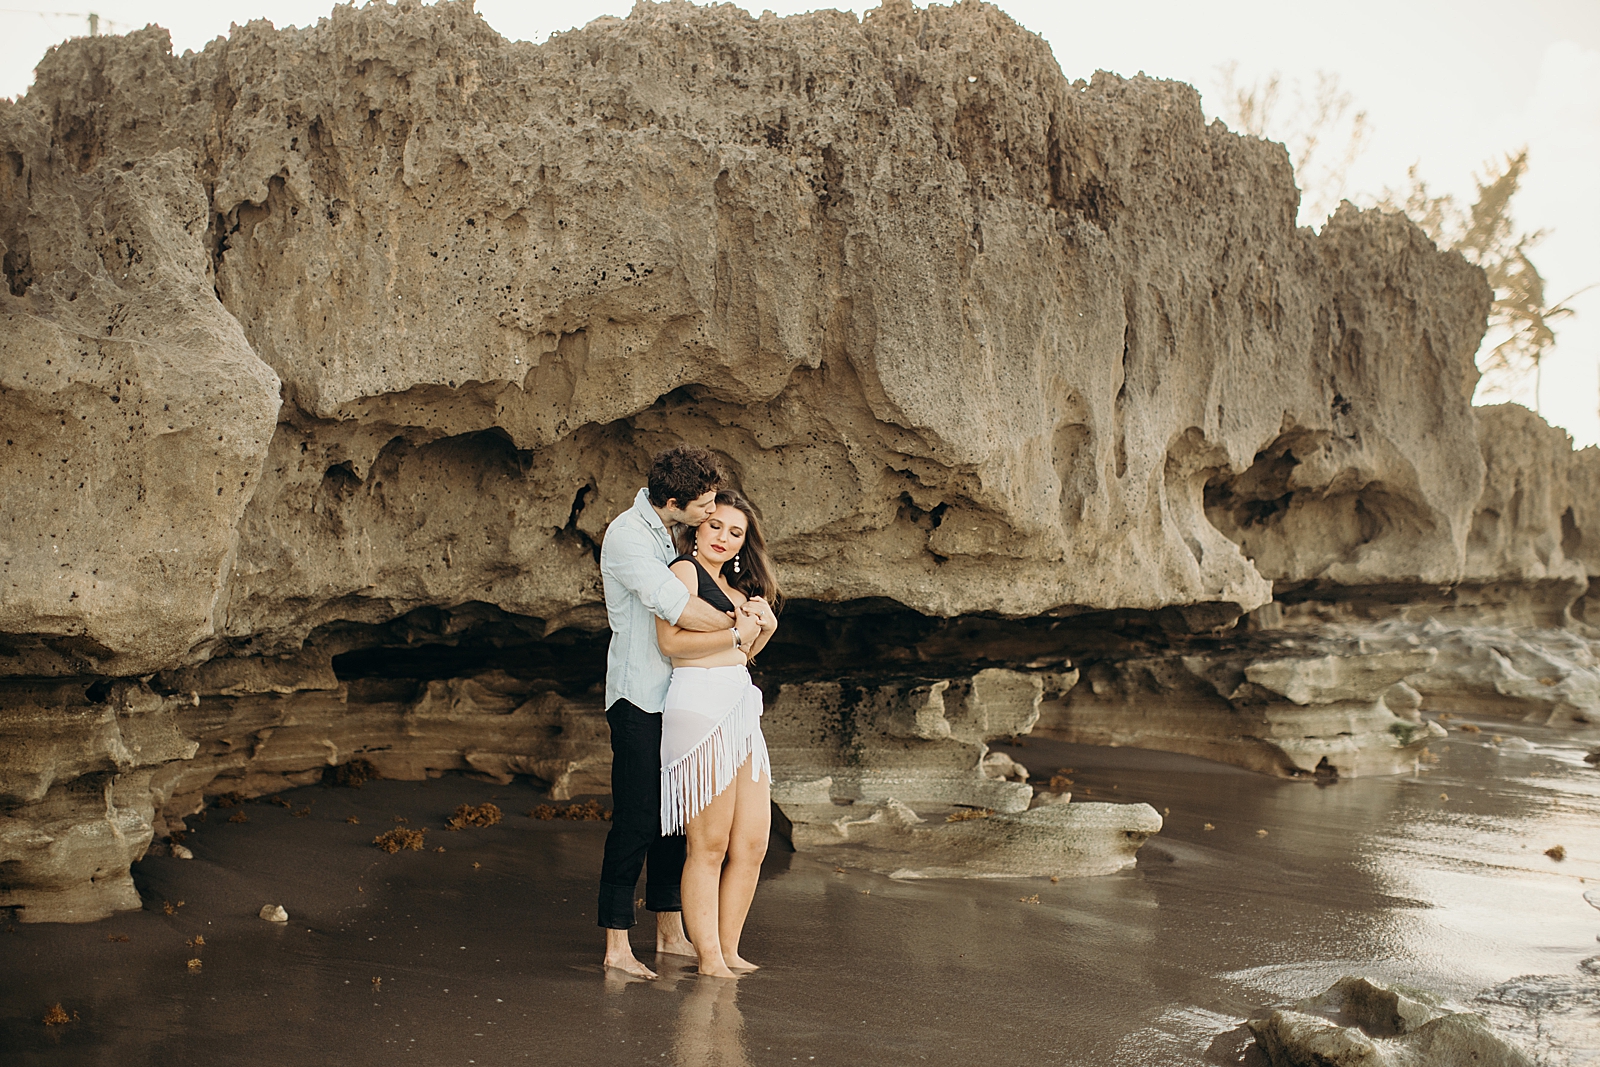 Man holding woman from behind and kissing side of her forehead next to naturally rock formation by the wet sand